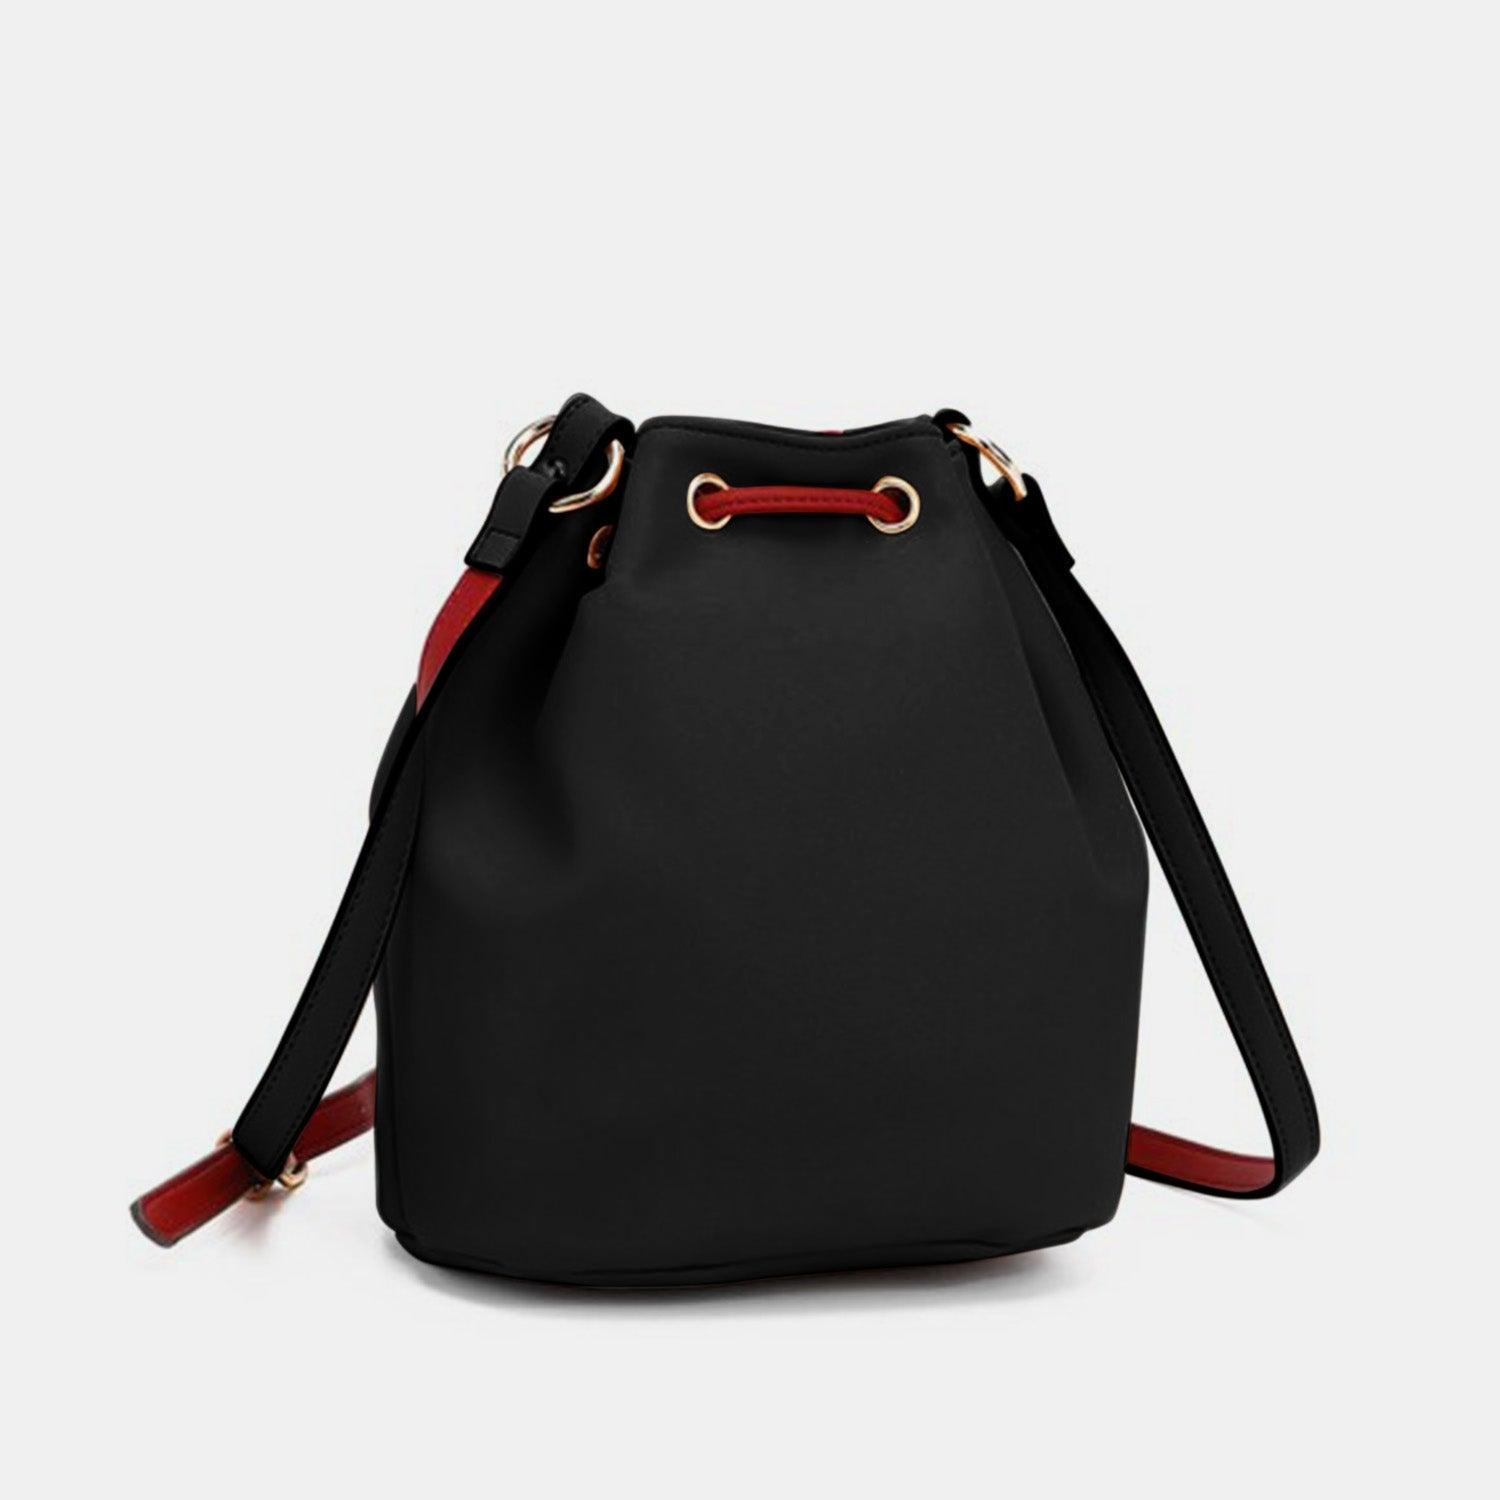 a black bag with a red handle